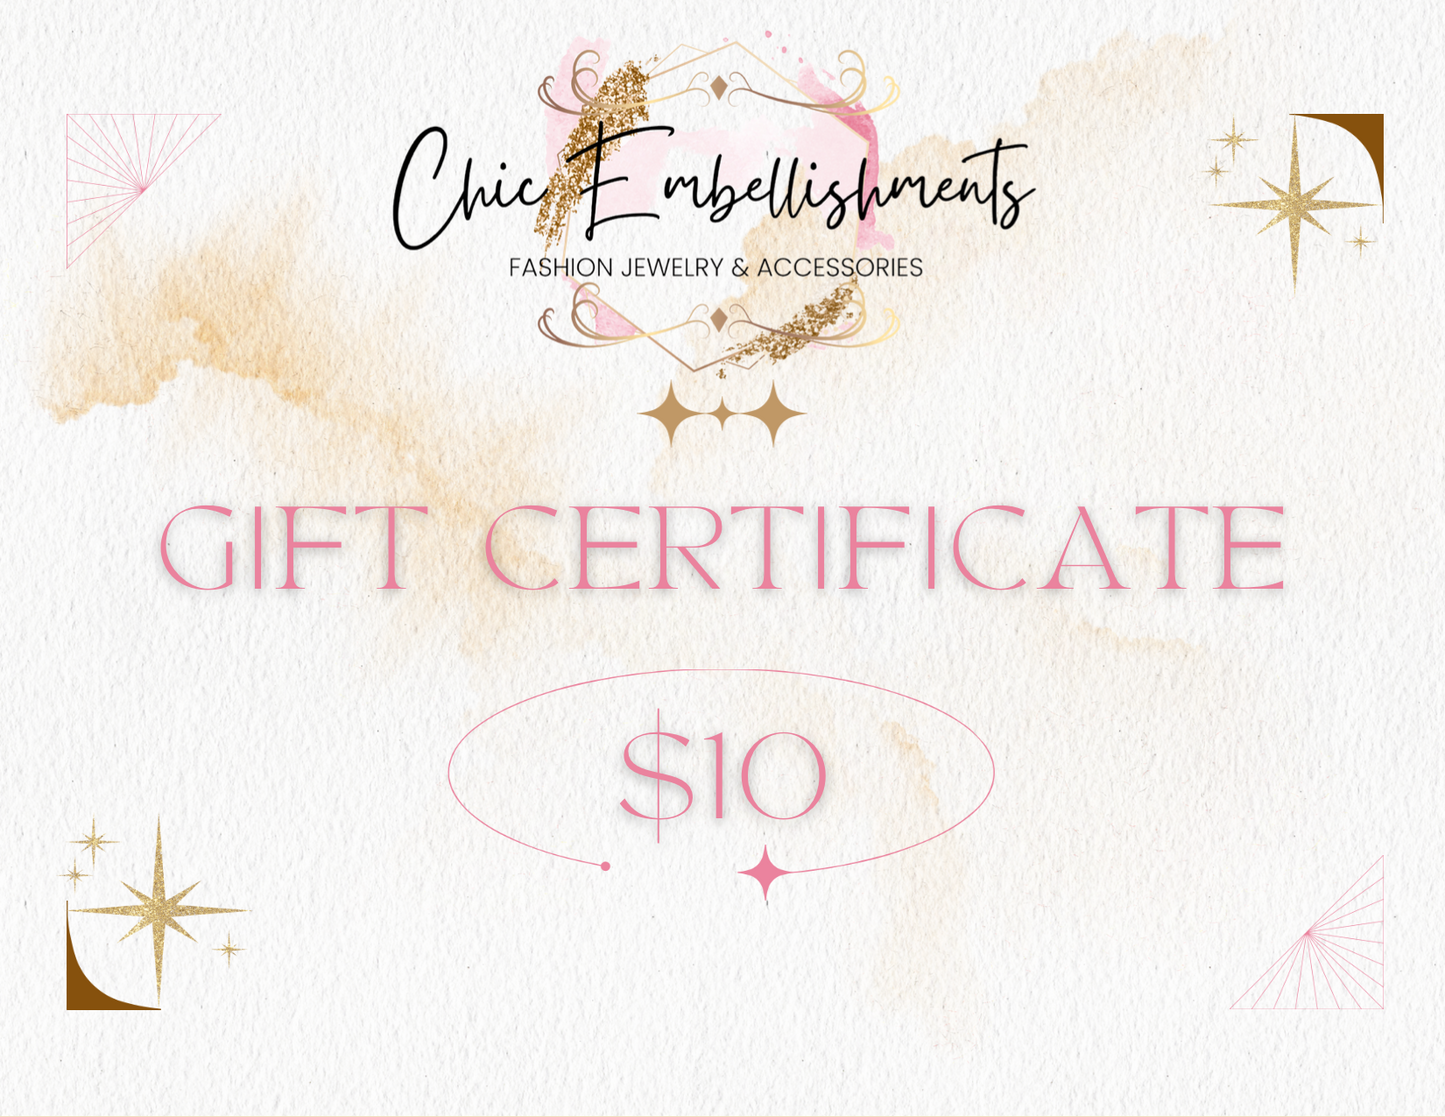 Chic Embellishments Gift Certificates